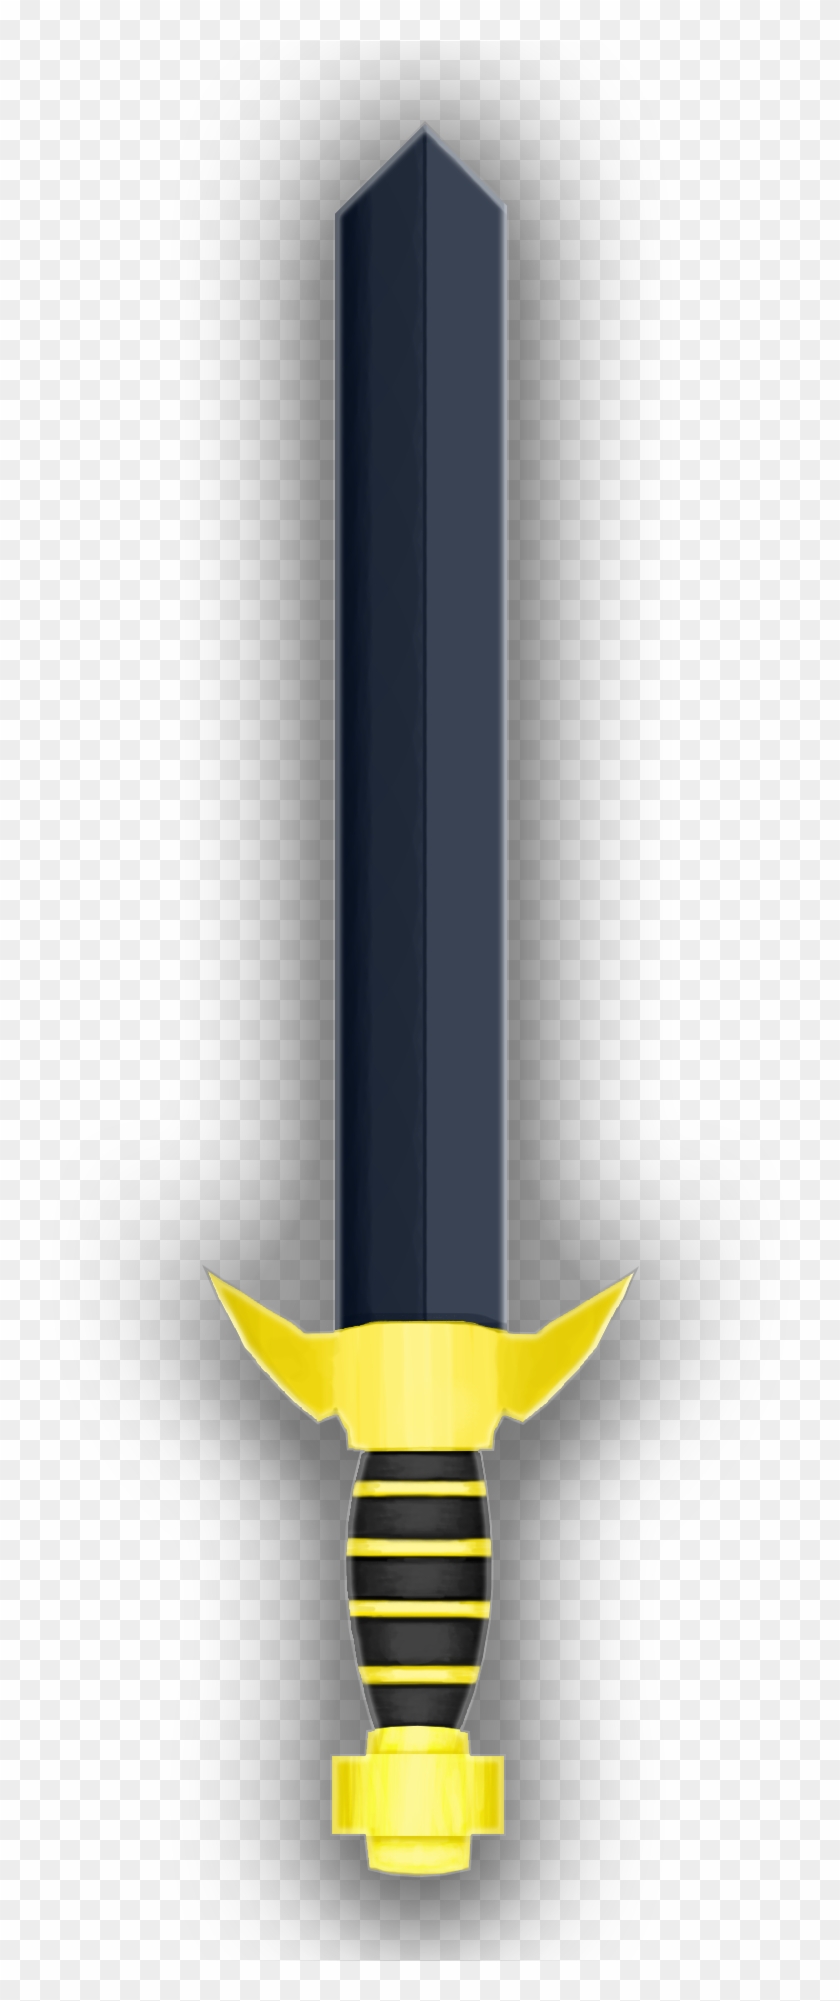 Preview - Sword Clipart #603778